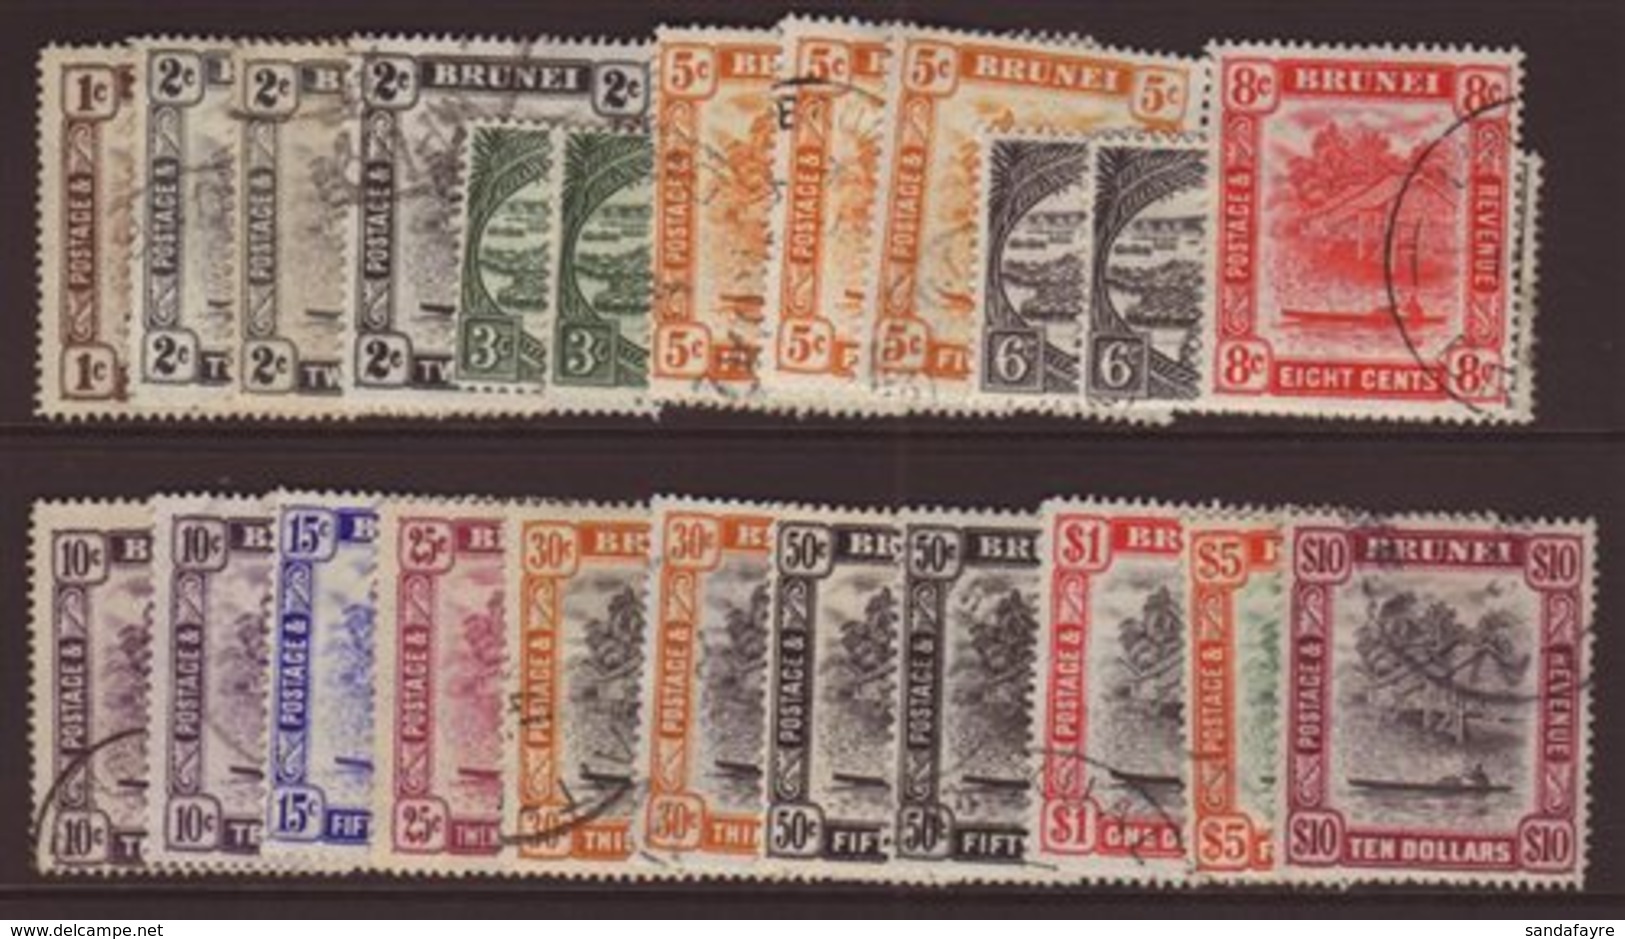 19478-51 Complete Set SG 79/92 Plus Perf Changes Including 5c, 30c & 50c, , Very Fine Cds Used. (23 Stamps) For More Ima - Brunei (...-1984)